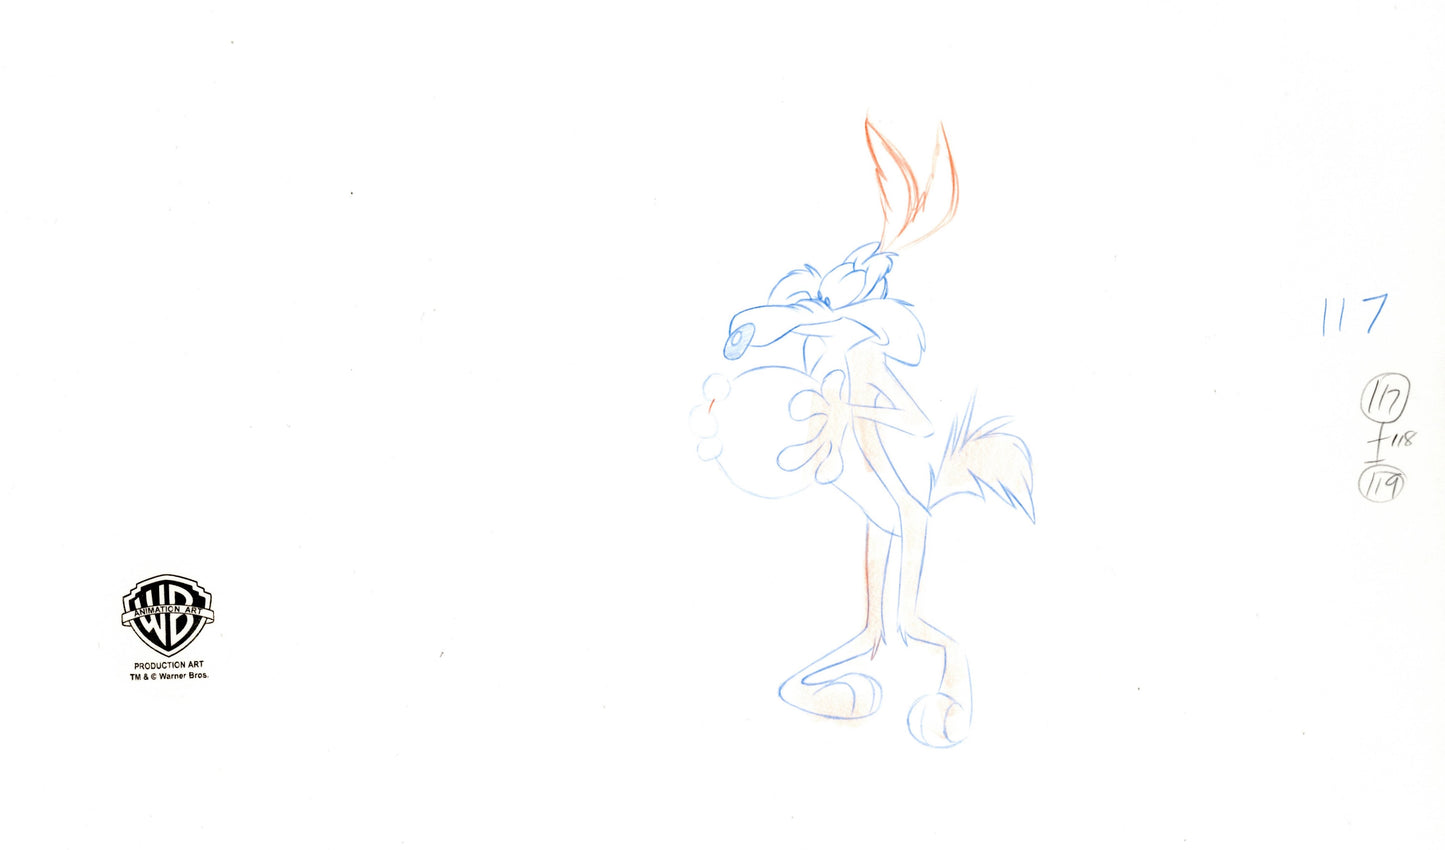 Space Jam Original Production Drawing: Wile E Coyote